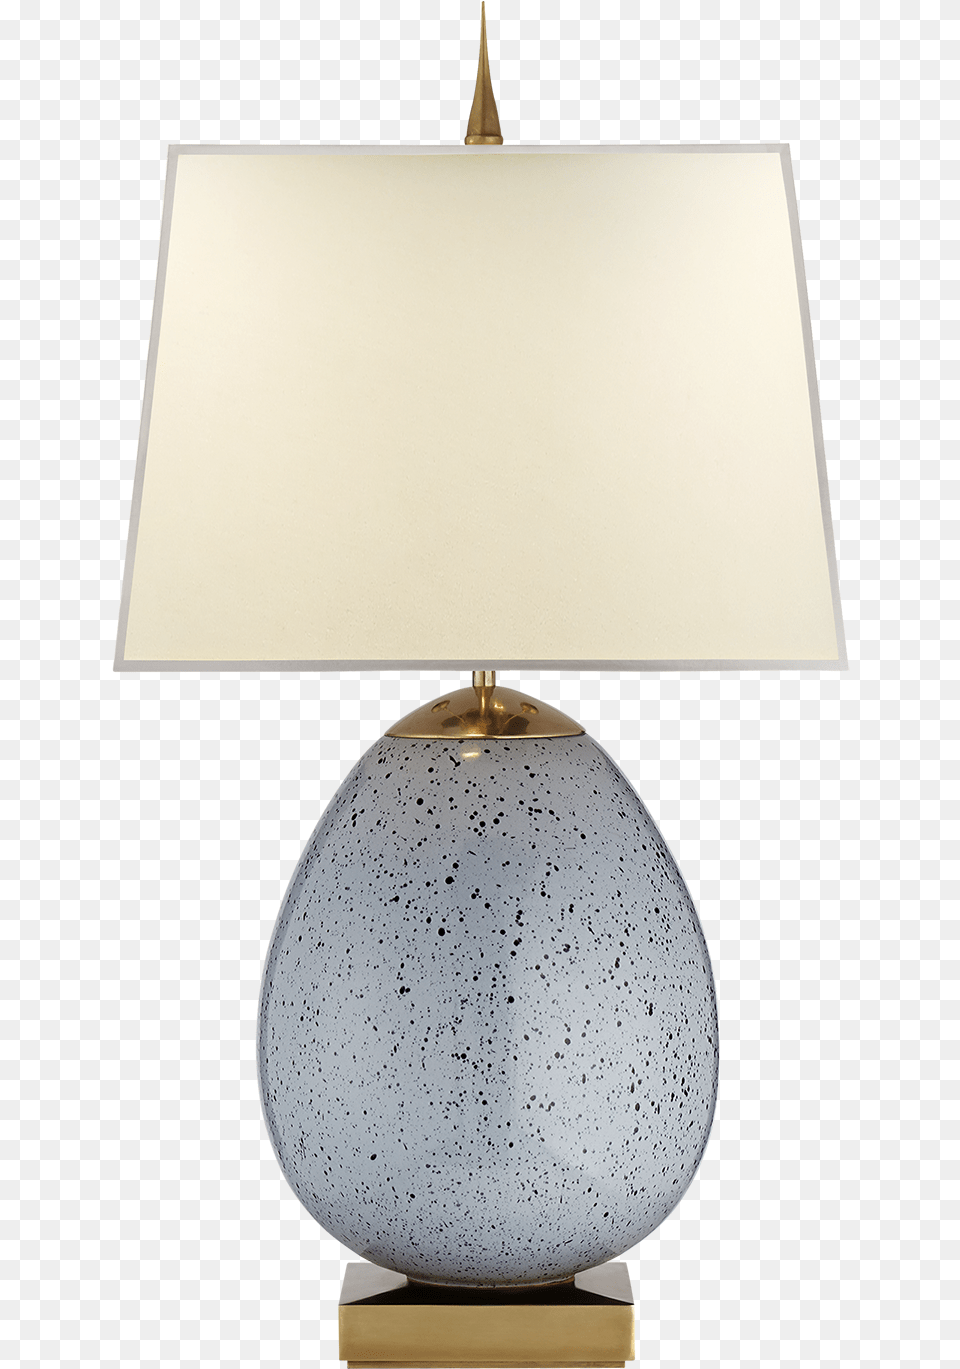 Ciro Large Table Lamp In Mottled Light Grey With Natural Visual Comfort Ciro Small Table Lamp In Mottled Light, Table Lamp, Lampshade, Astronomy, Moon Free Png Download